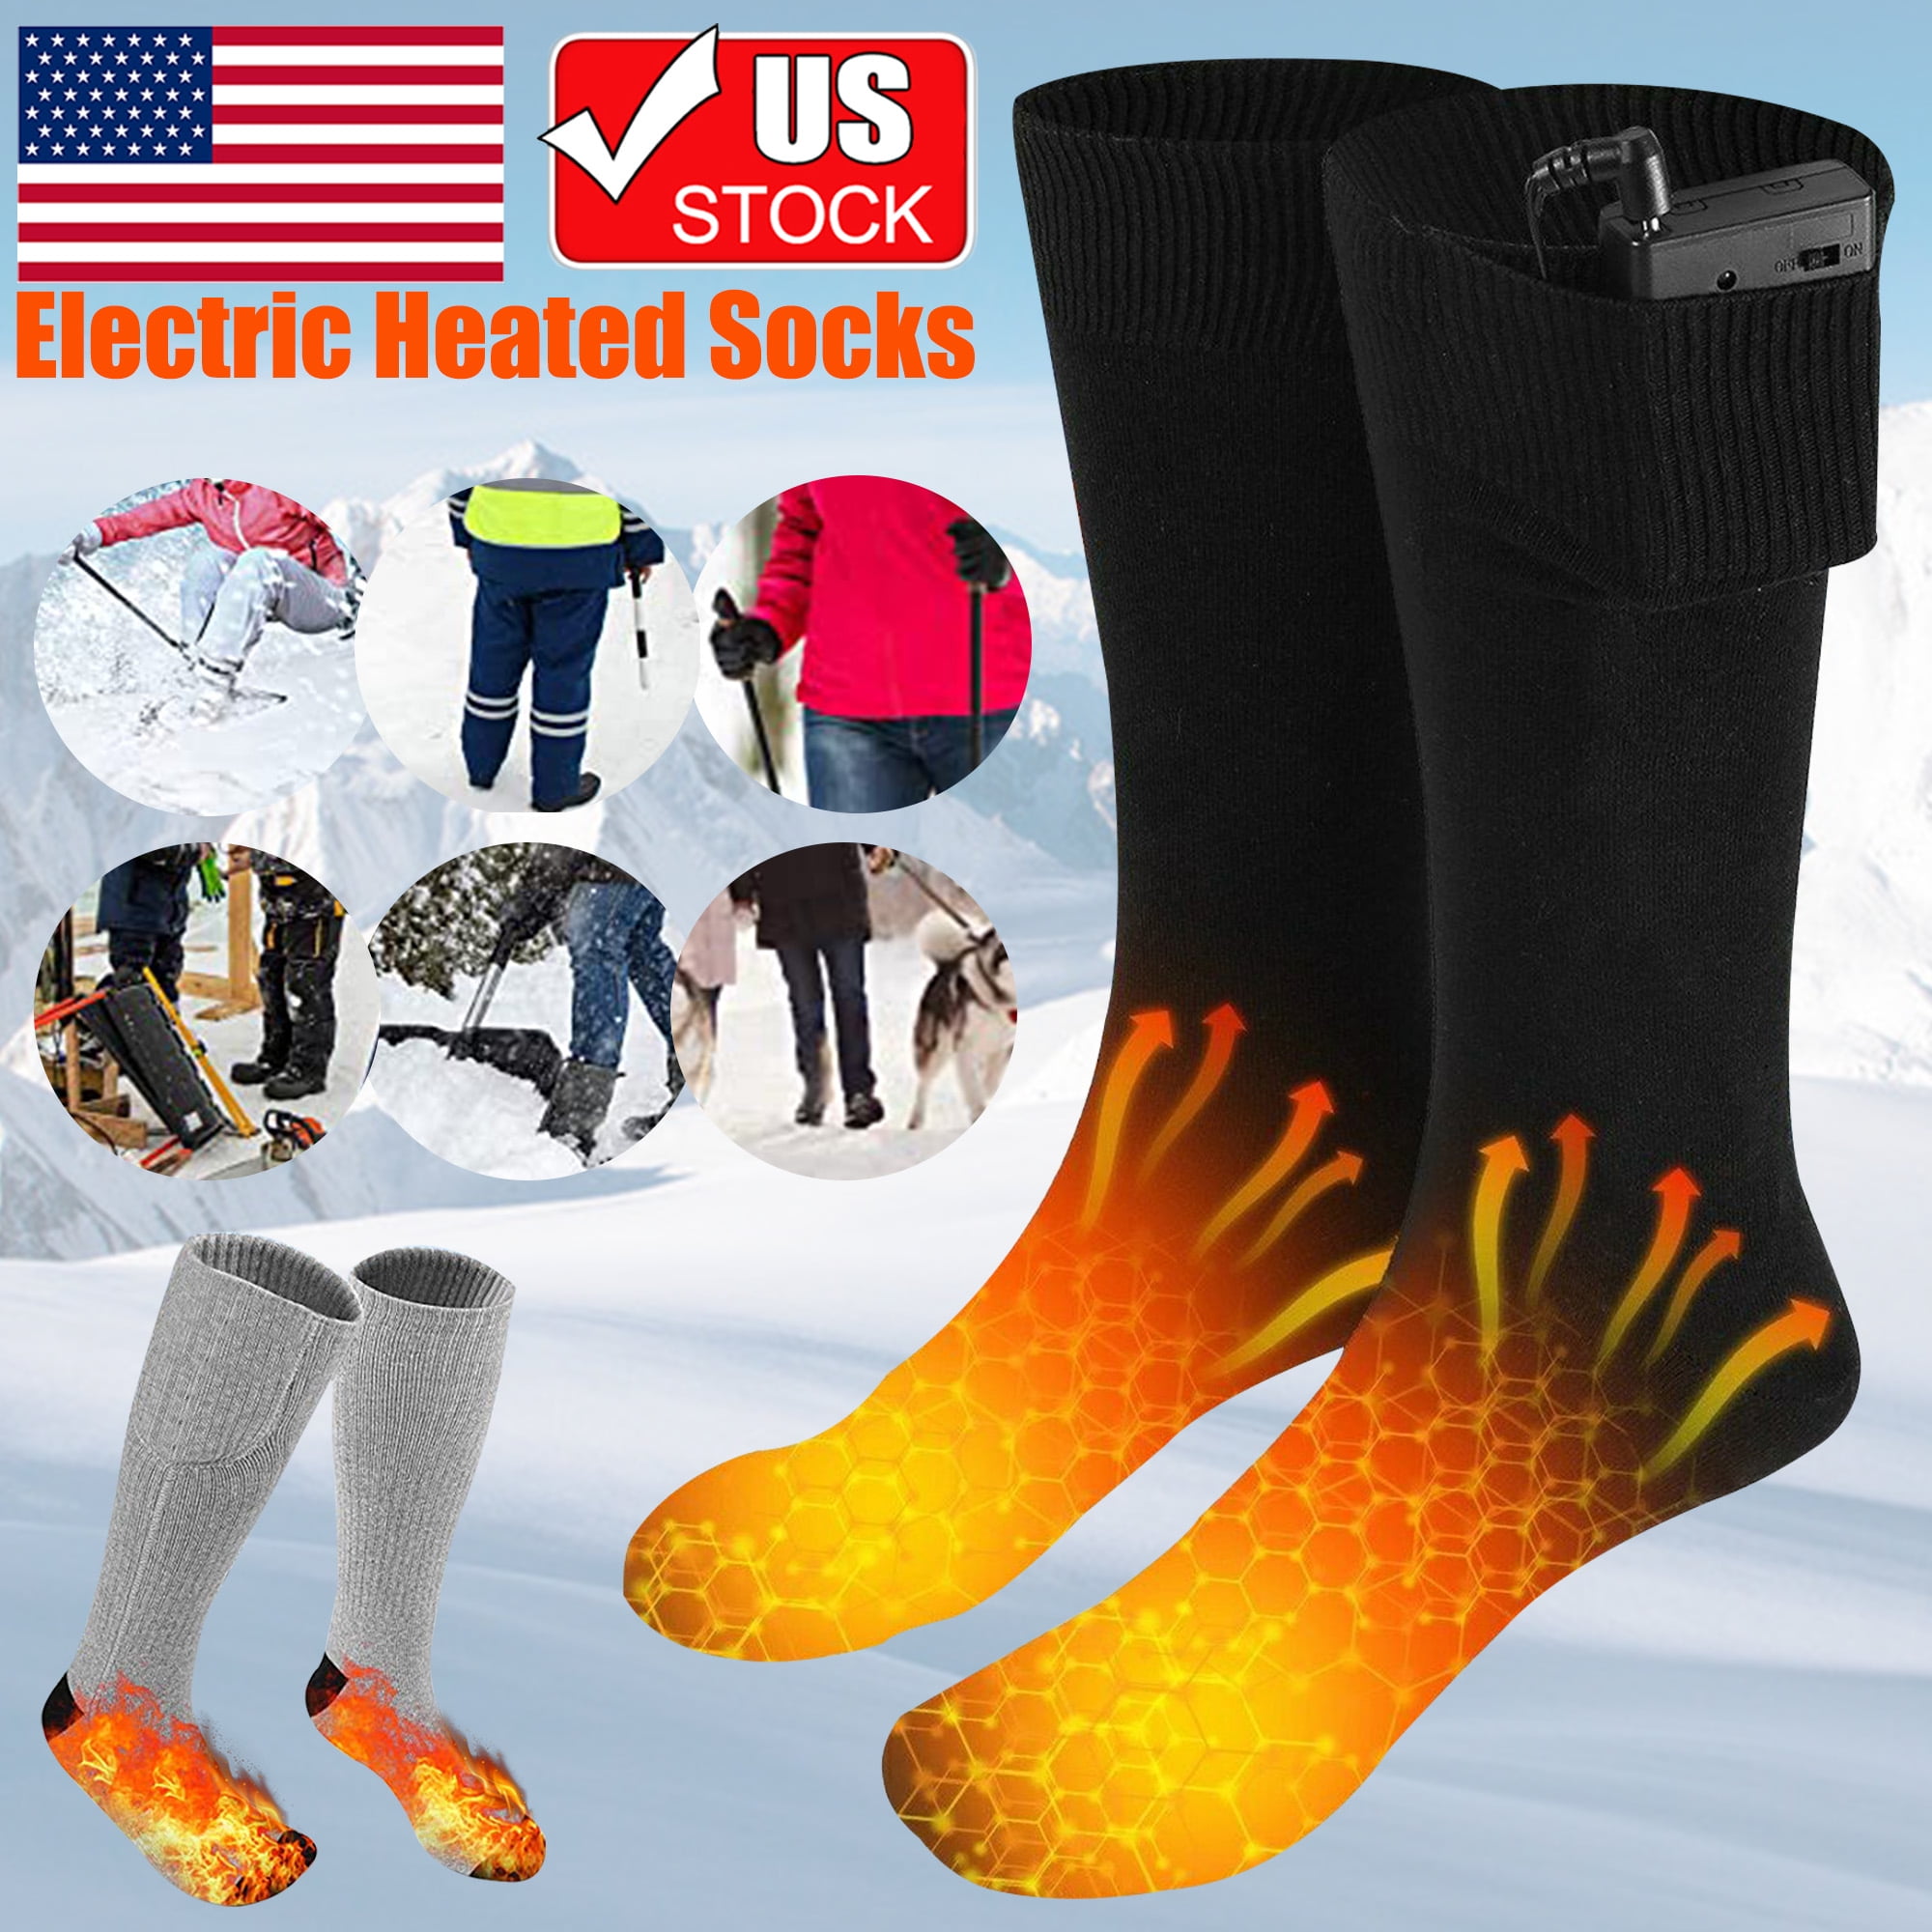 Electric Heated Socks USB Rechargeable Battery Foot Winter Warmer Thermal 2020 